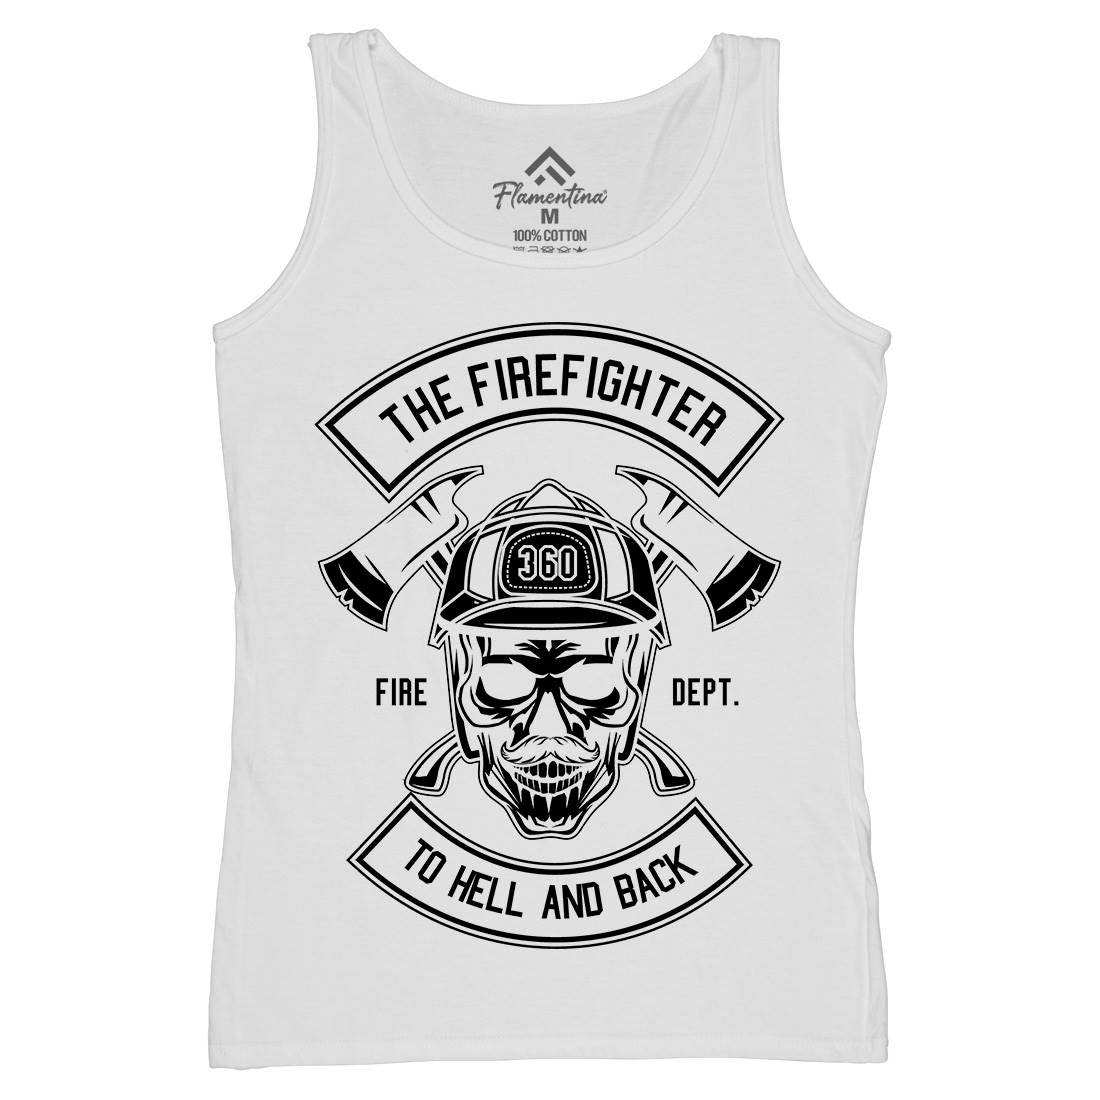 The Fire Fighter Womens Organic Tank Top Vest Firefighters B651